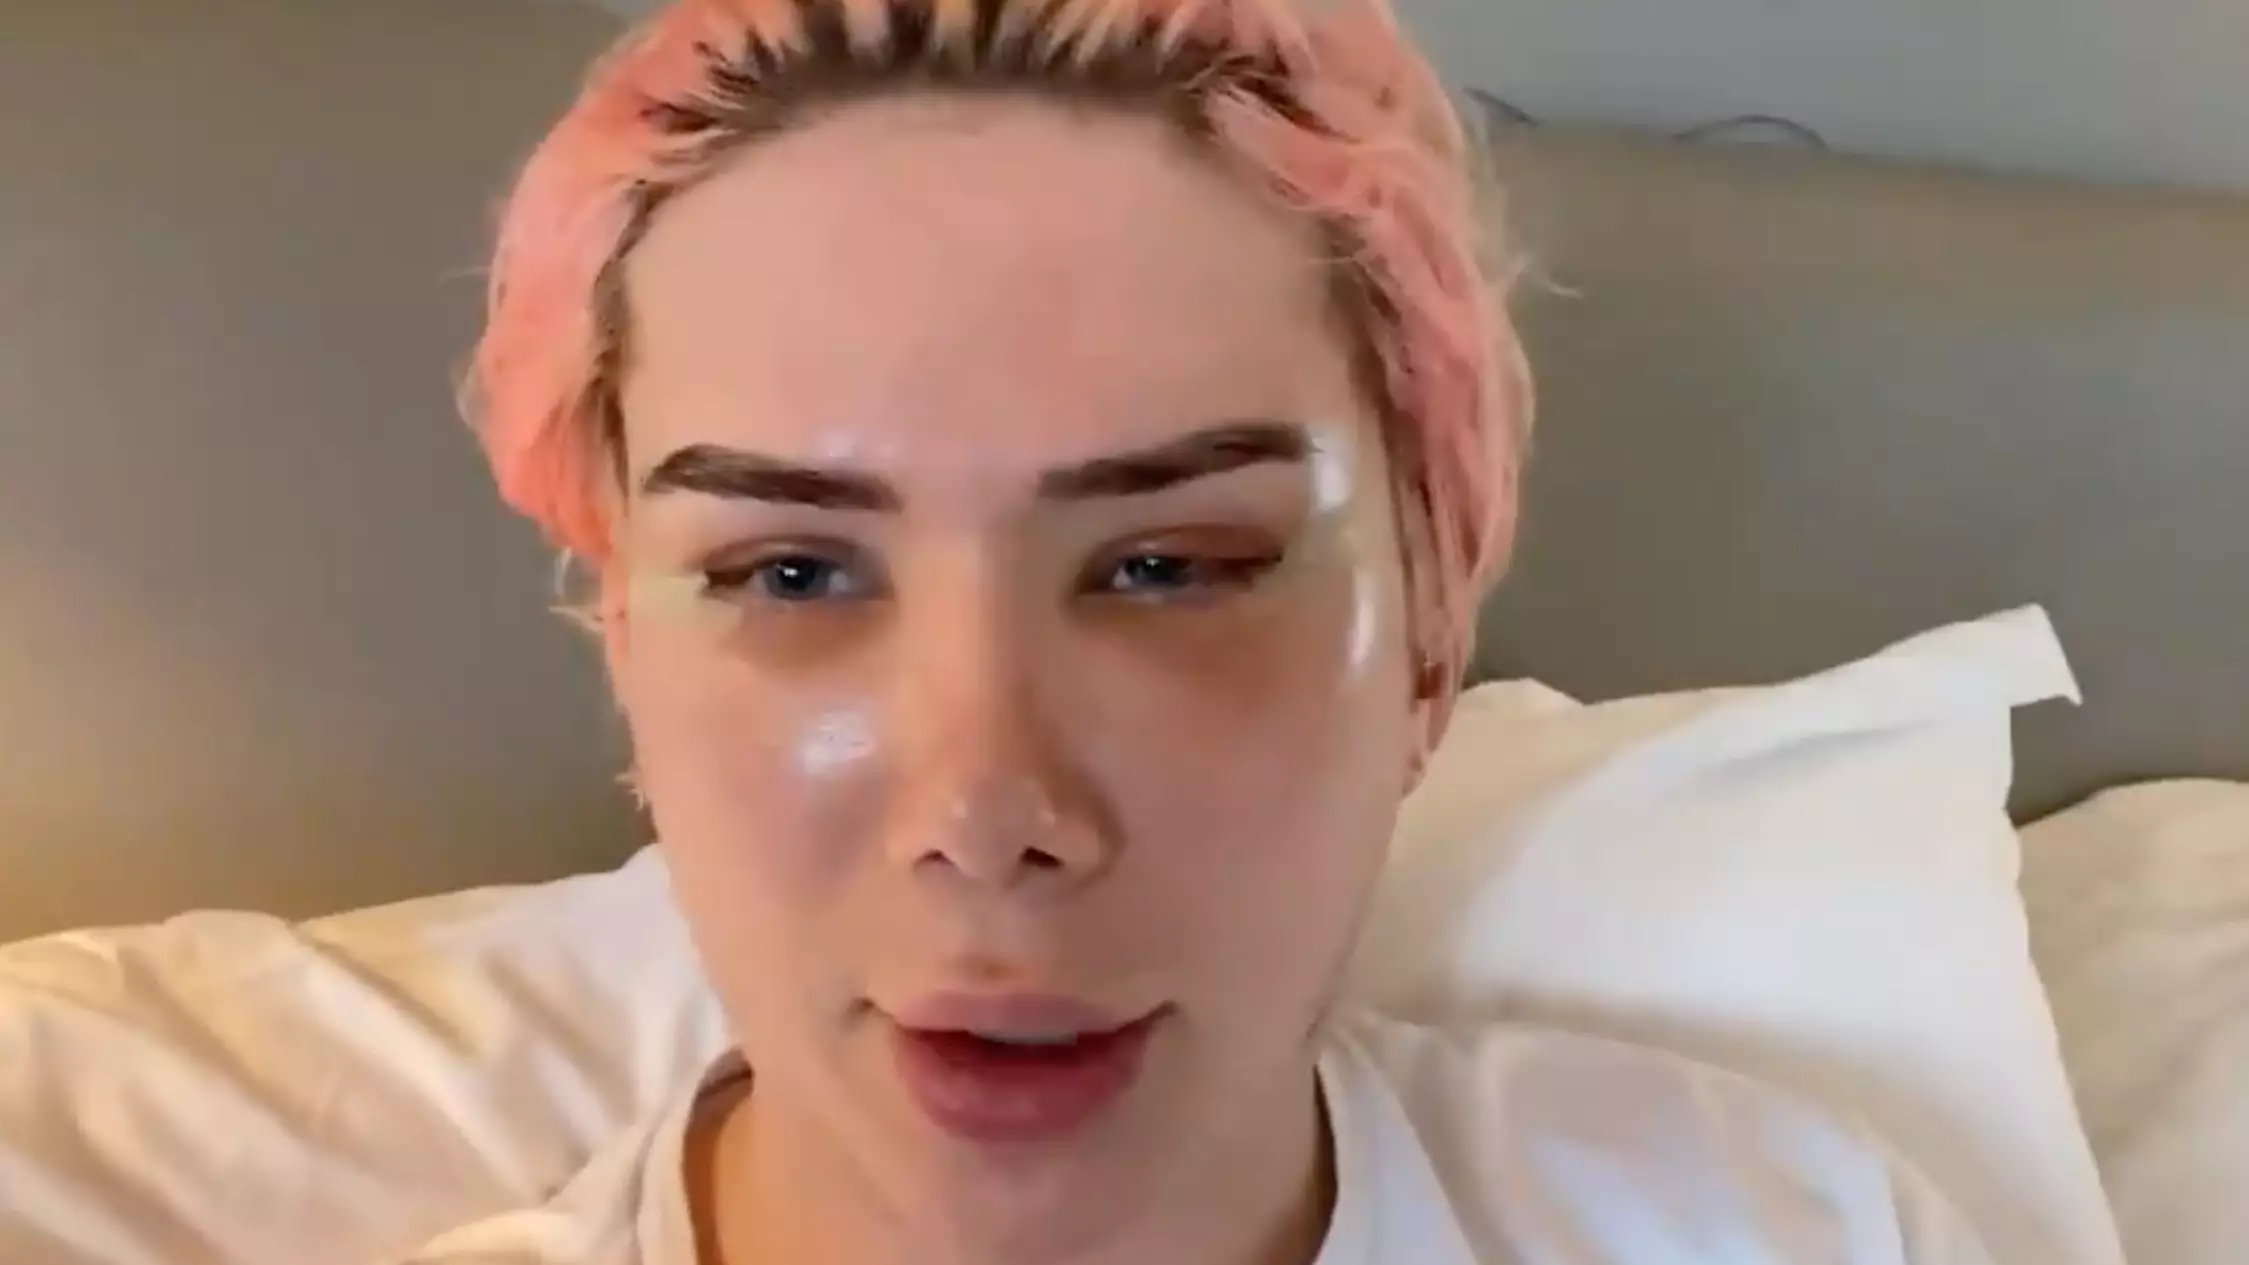 White Influencer Now ‘Identifies As Korean’ After Getting Surgery To Look Like Pop Star